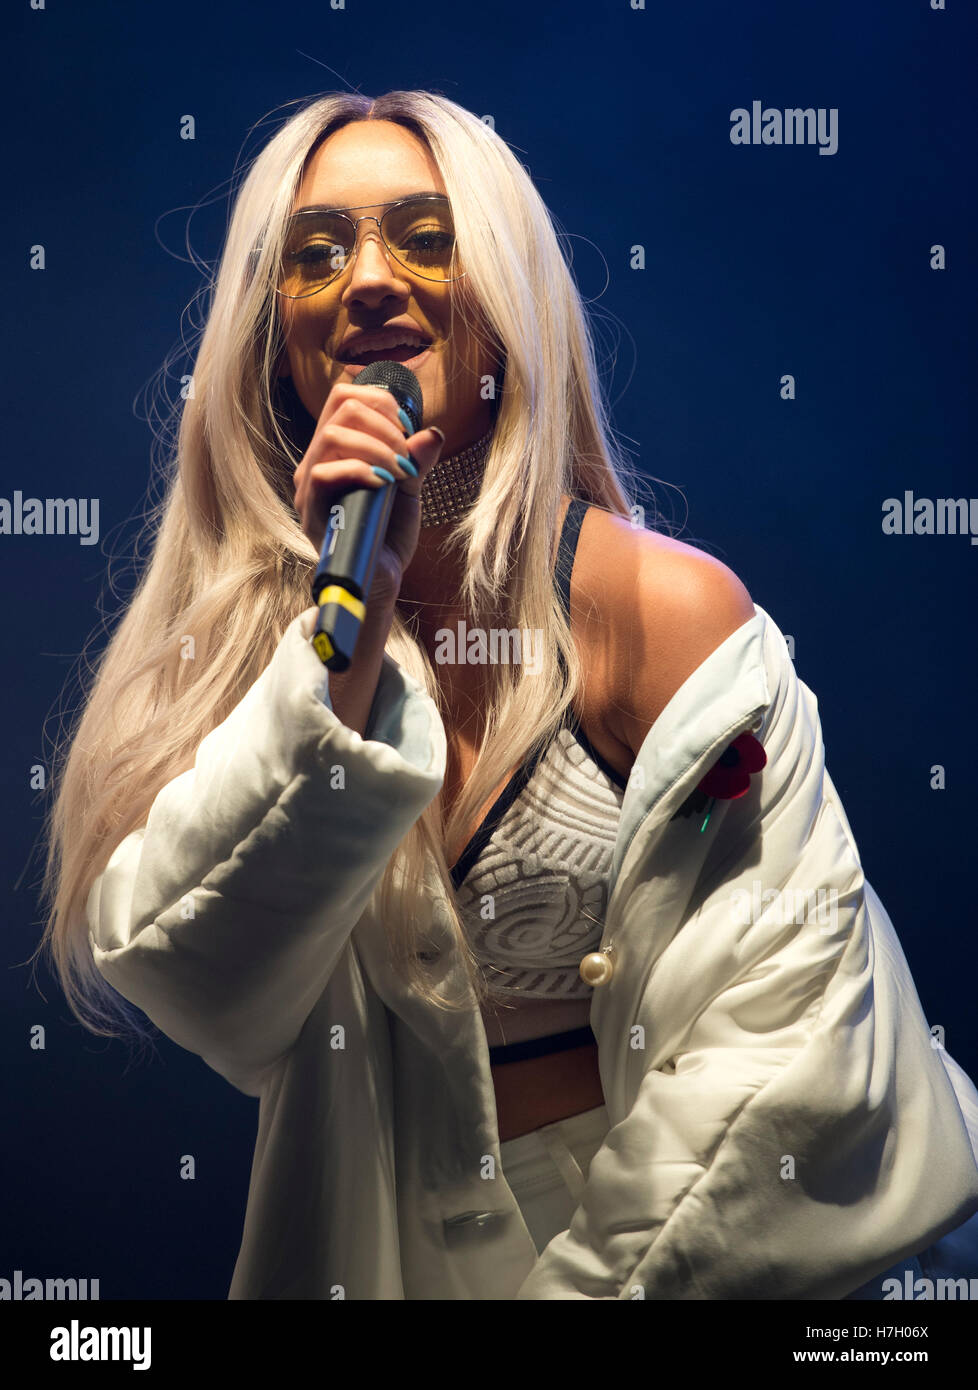 Manchester, UK. 4th November 2016. Nadine Samuels of M.O (Modus Operandi) perform at the annual Christmas Lights Switch-on in Albert Square, Manchester. Credit:  Russell Hart/Alamy Live News. Stock Photo